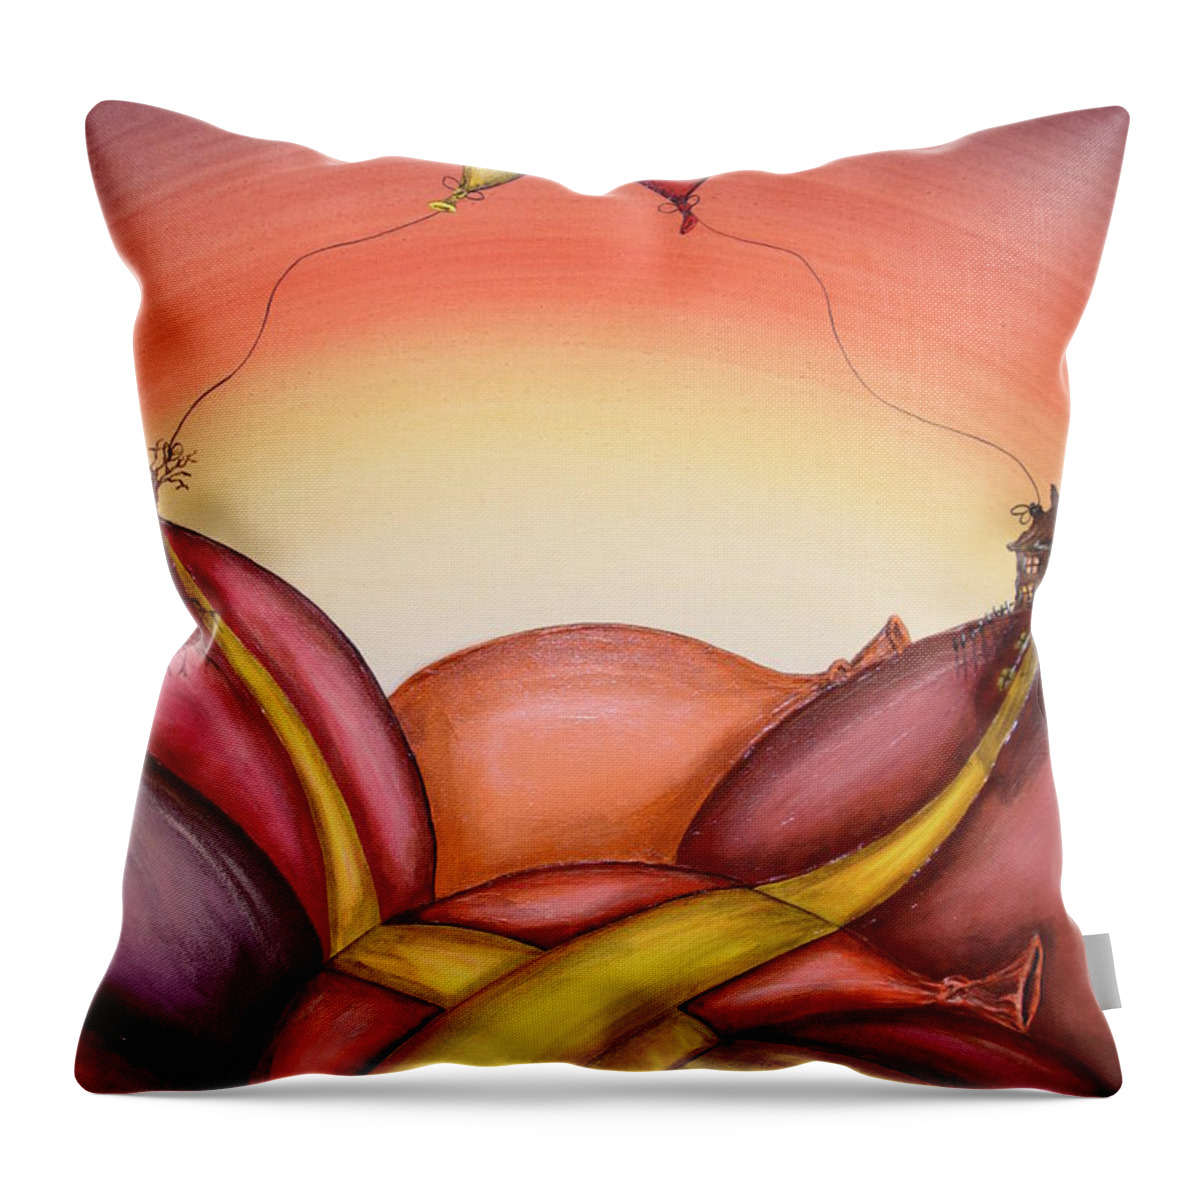 Balloons Throw Pillow featuring the painting The Big Kiss by Krystyna Spink